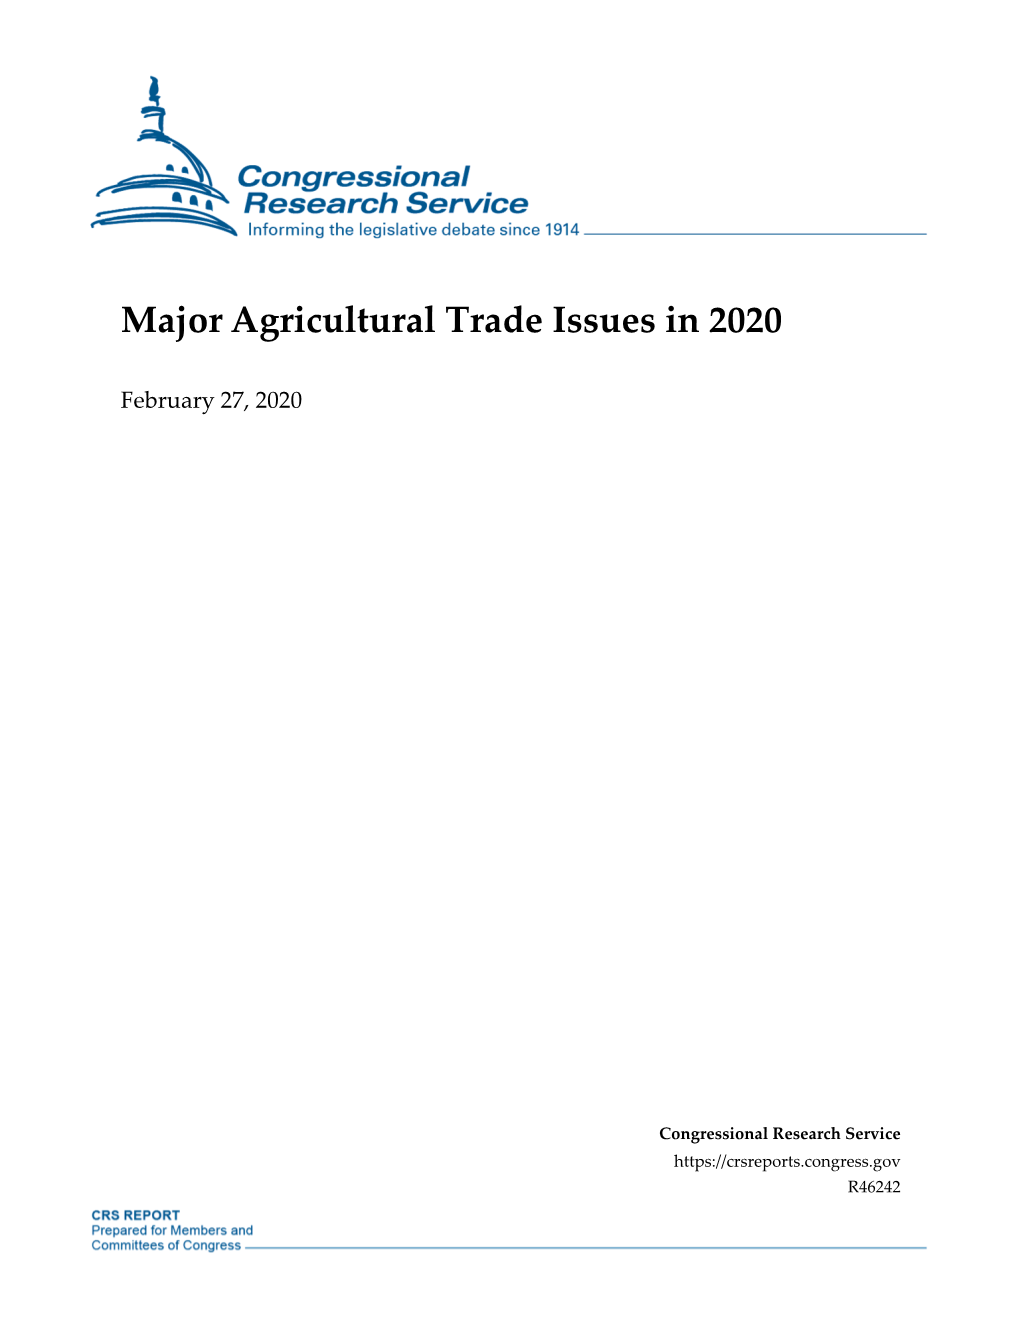 Major Agricultural Trade Issues in 2020